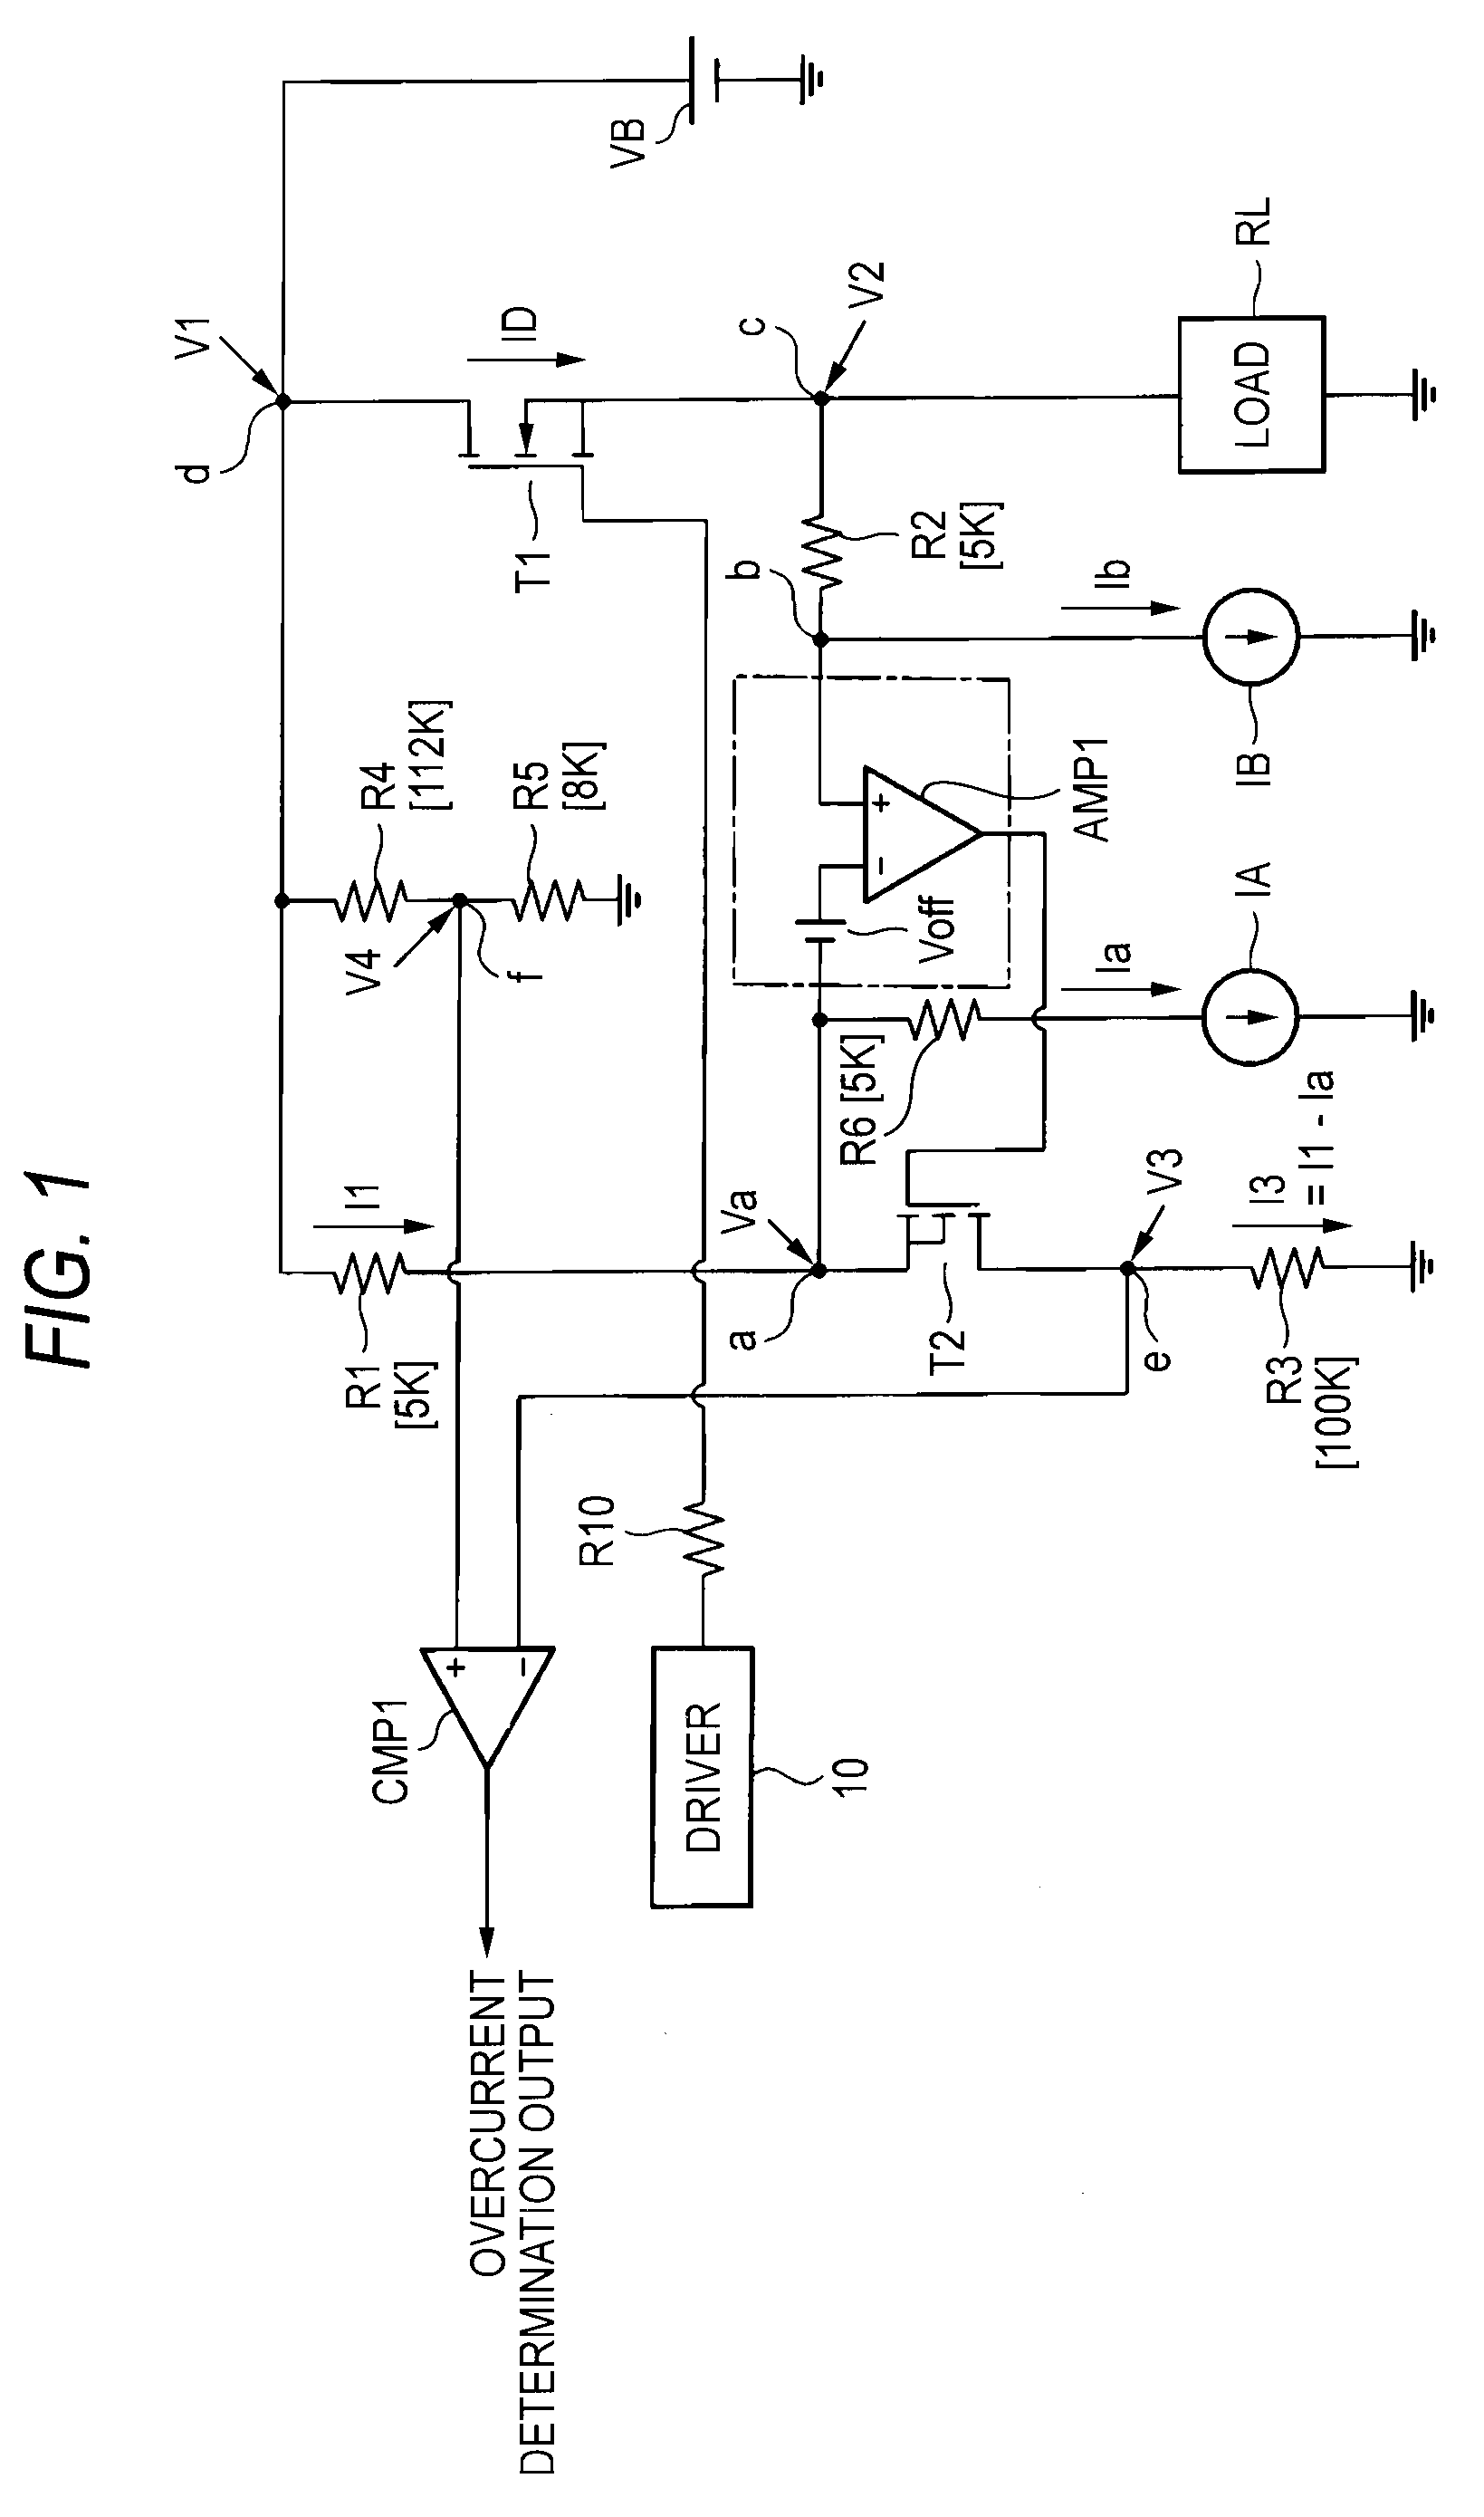 Overcurrent protection apparatus for load circuit